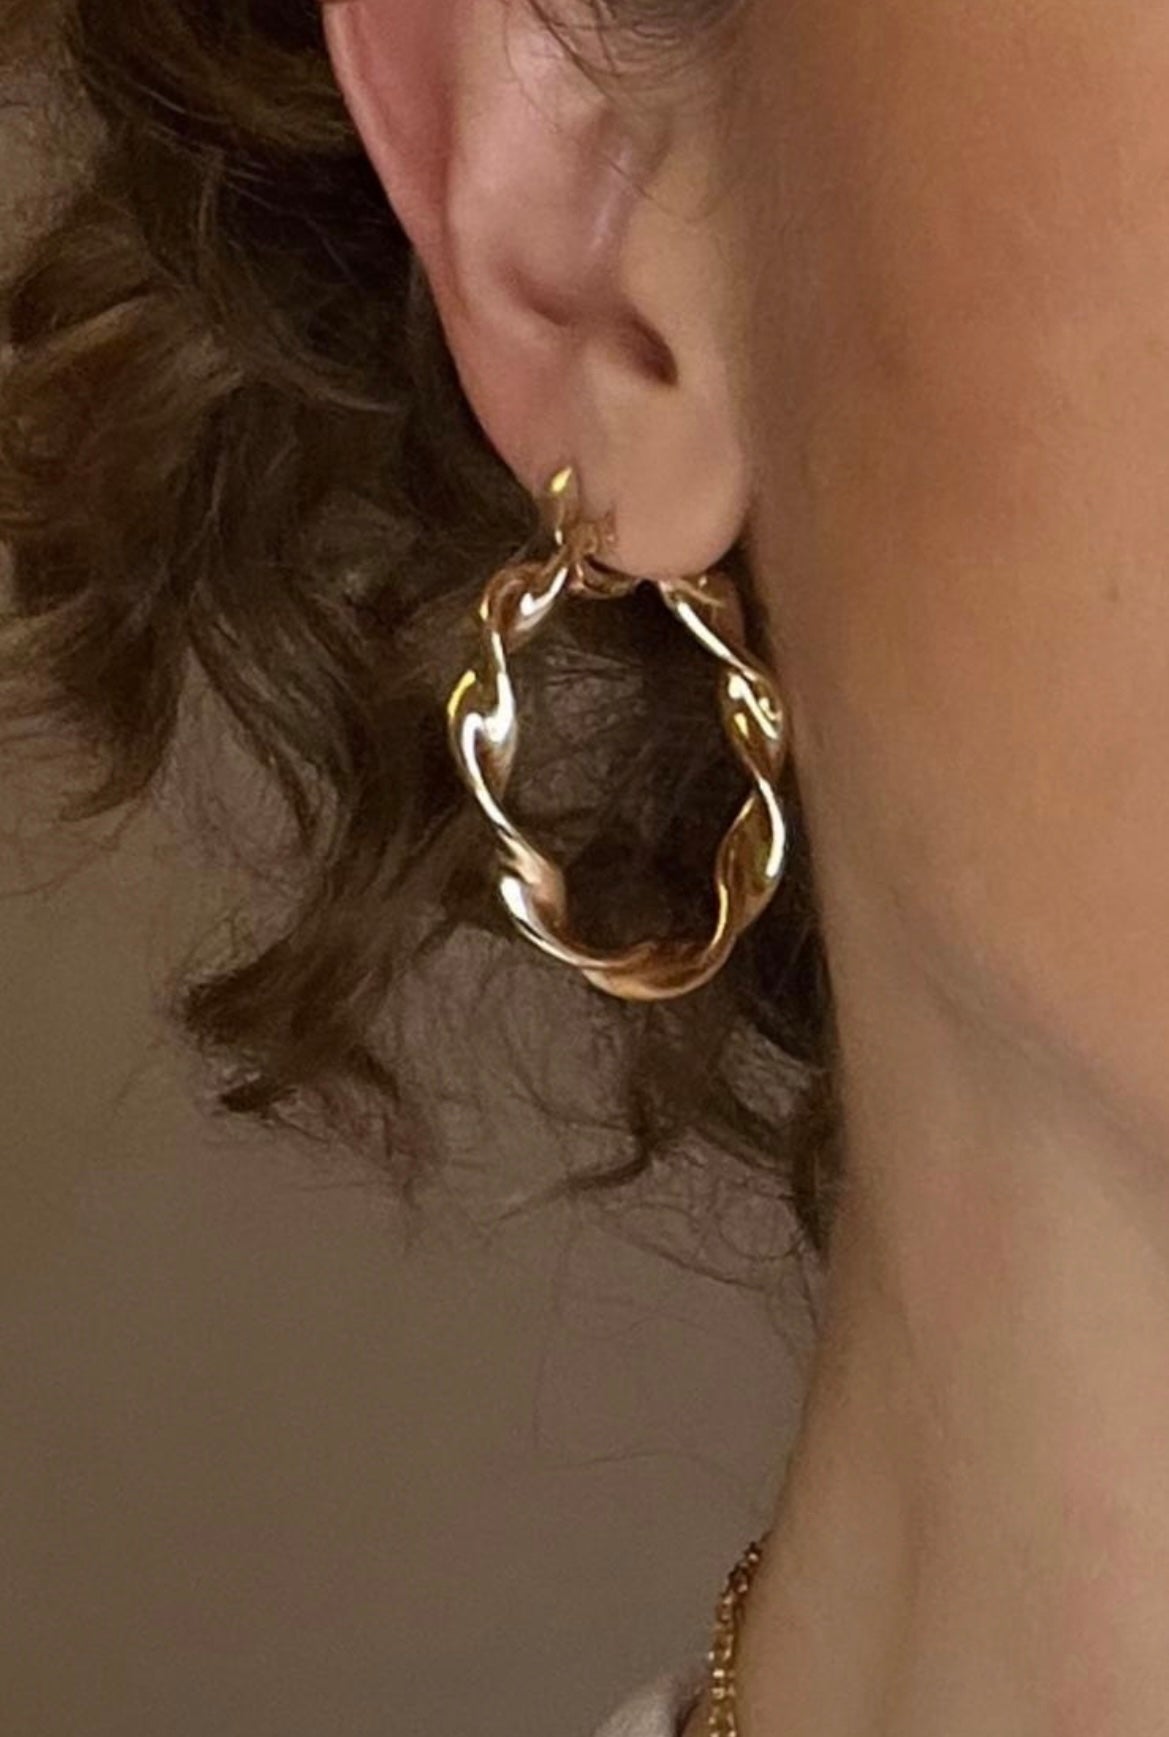 Vintage Hollow Twisted Hoops